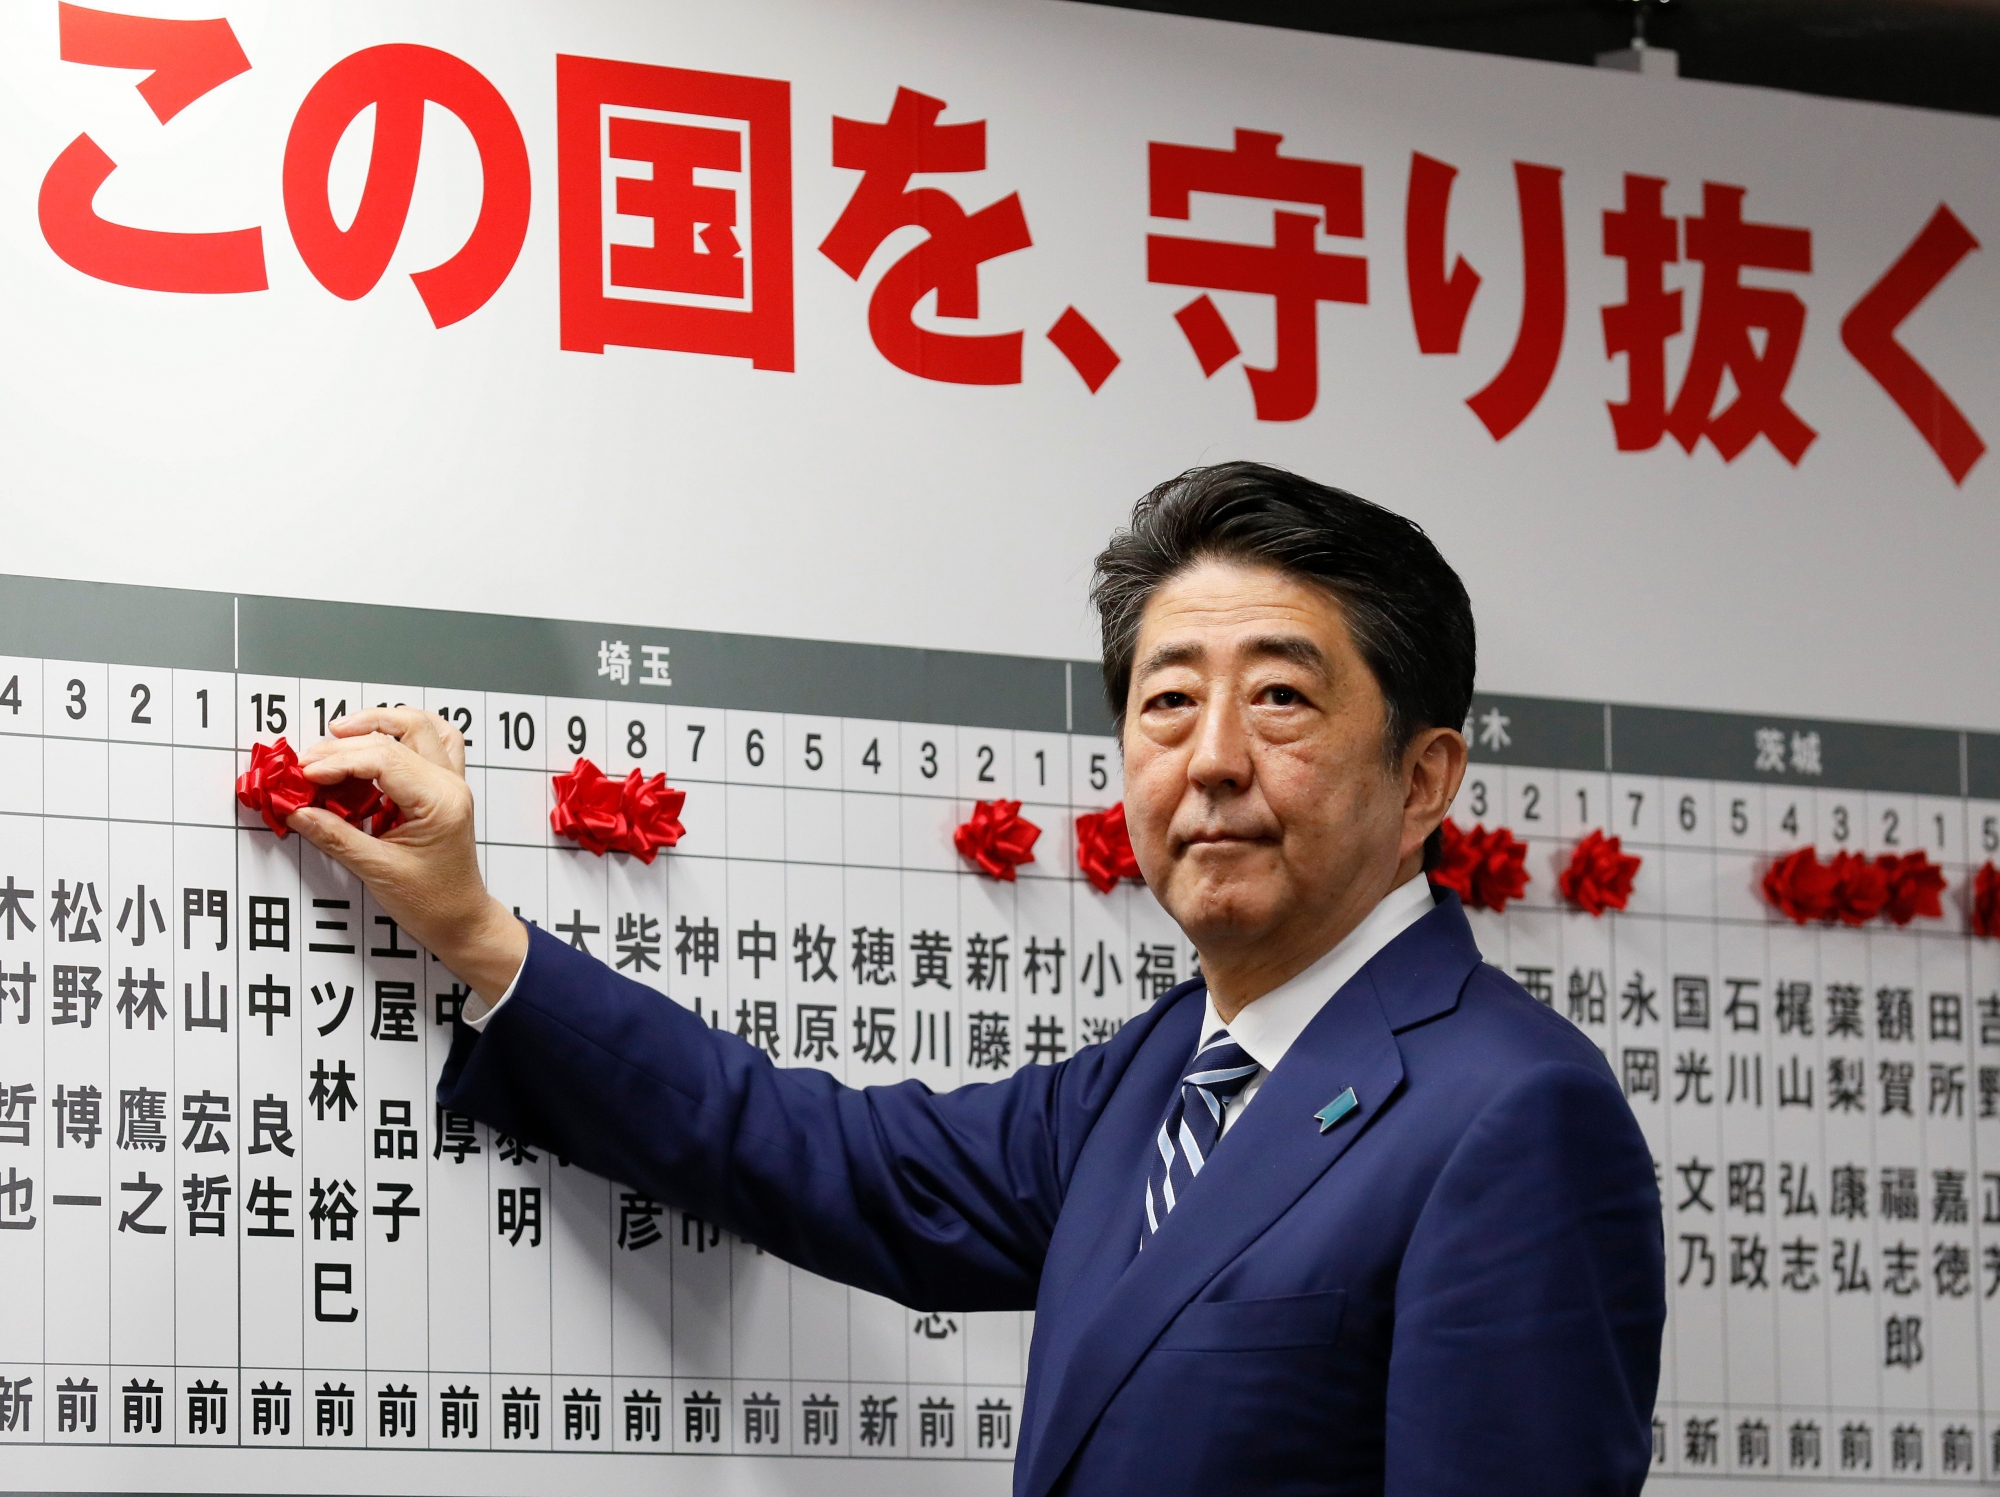 epa06282186 Japanese Prime Minister Shinzo Abe puts a red rose on name of a party's candidate to be elected in the Lower House election at headquarters of the ruling Liberal Democratic Party (LDP) in Tokyo, Japan, 22 October 2017. The LDP and a coalition partner are expected to win landslide victory in the election. The Japanese characters reads, 'Defend this country'.  EPA/KIMIMASA MAYAMA JAPAN POLITICS ELECTION